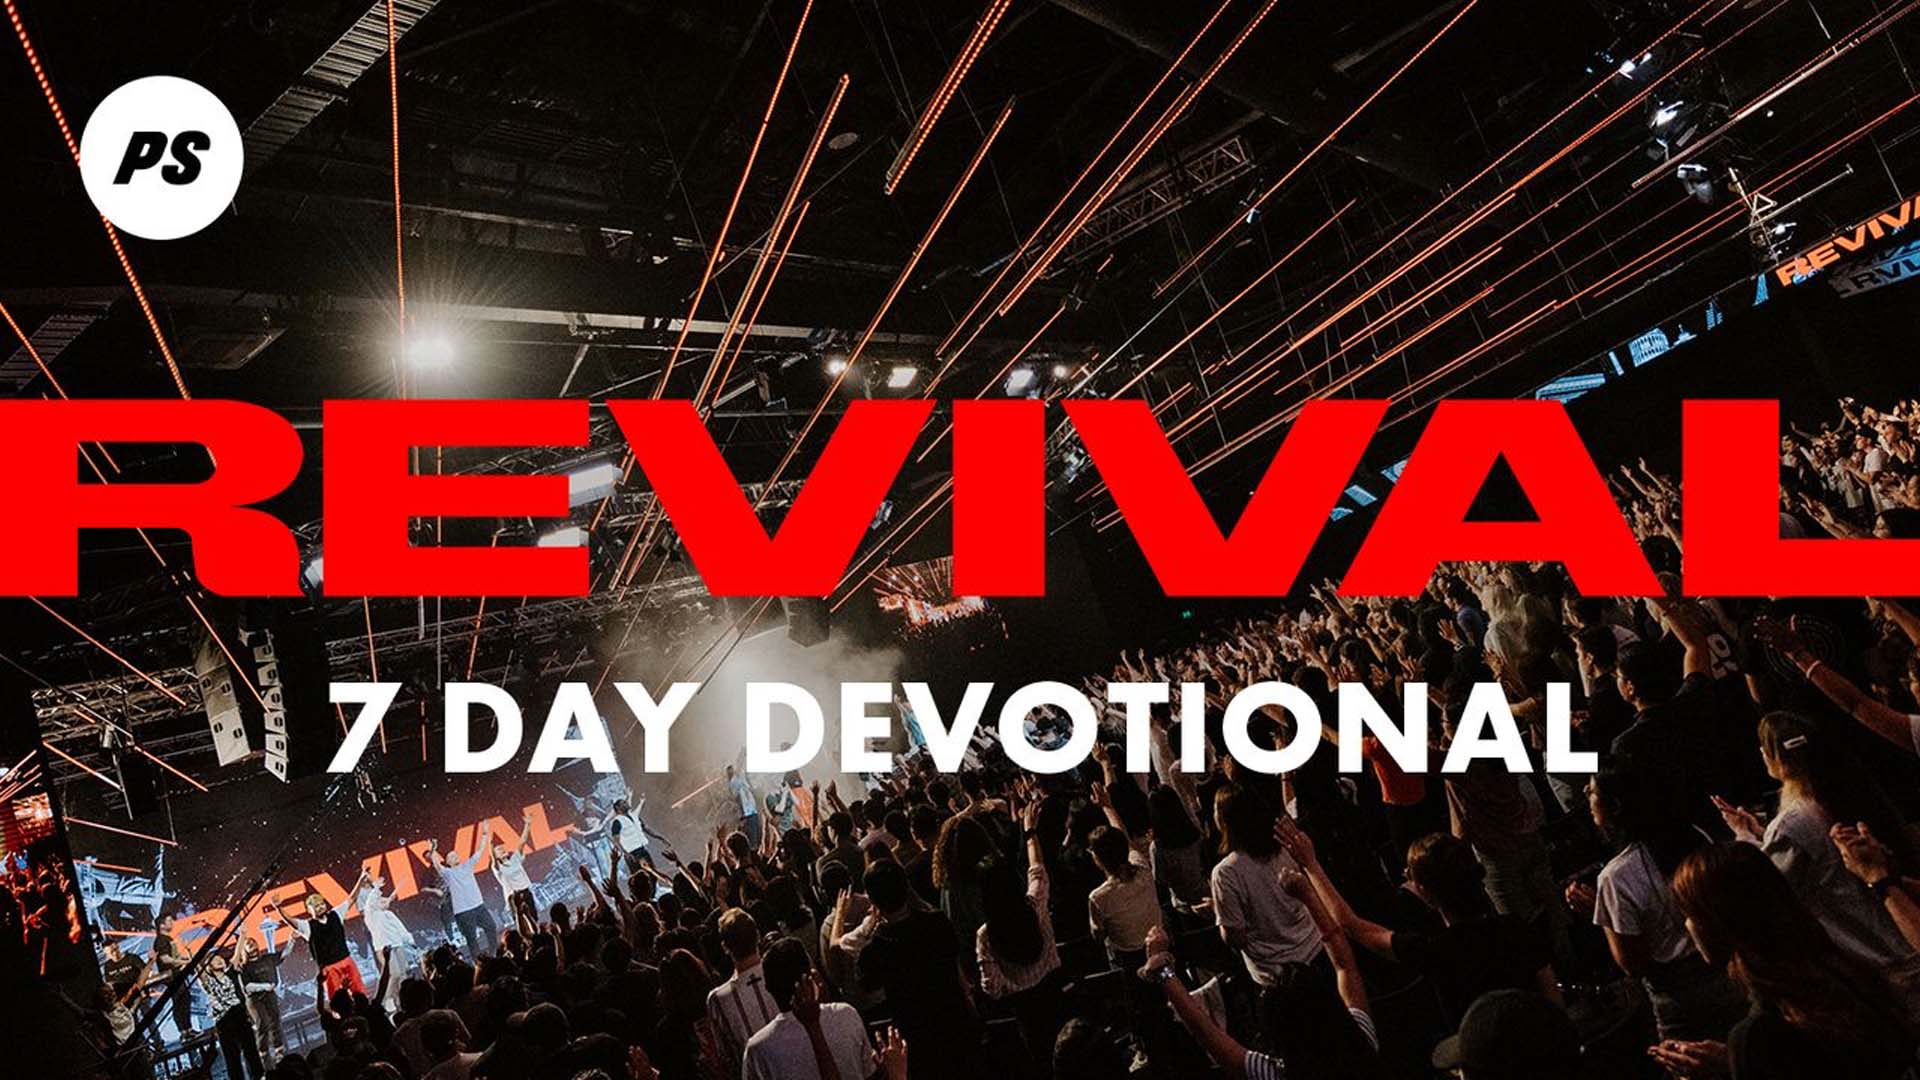 Featured Image for “Revival 7 Day Devotional"